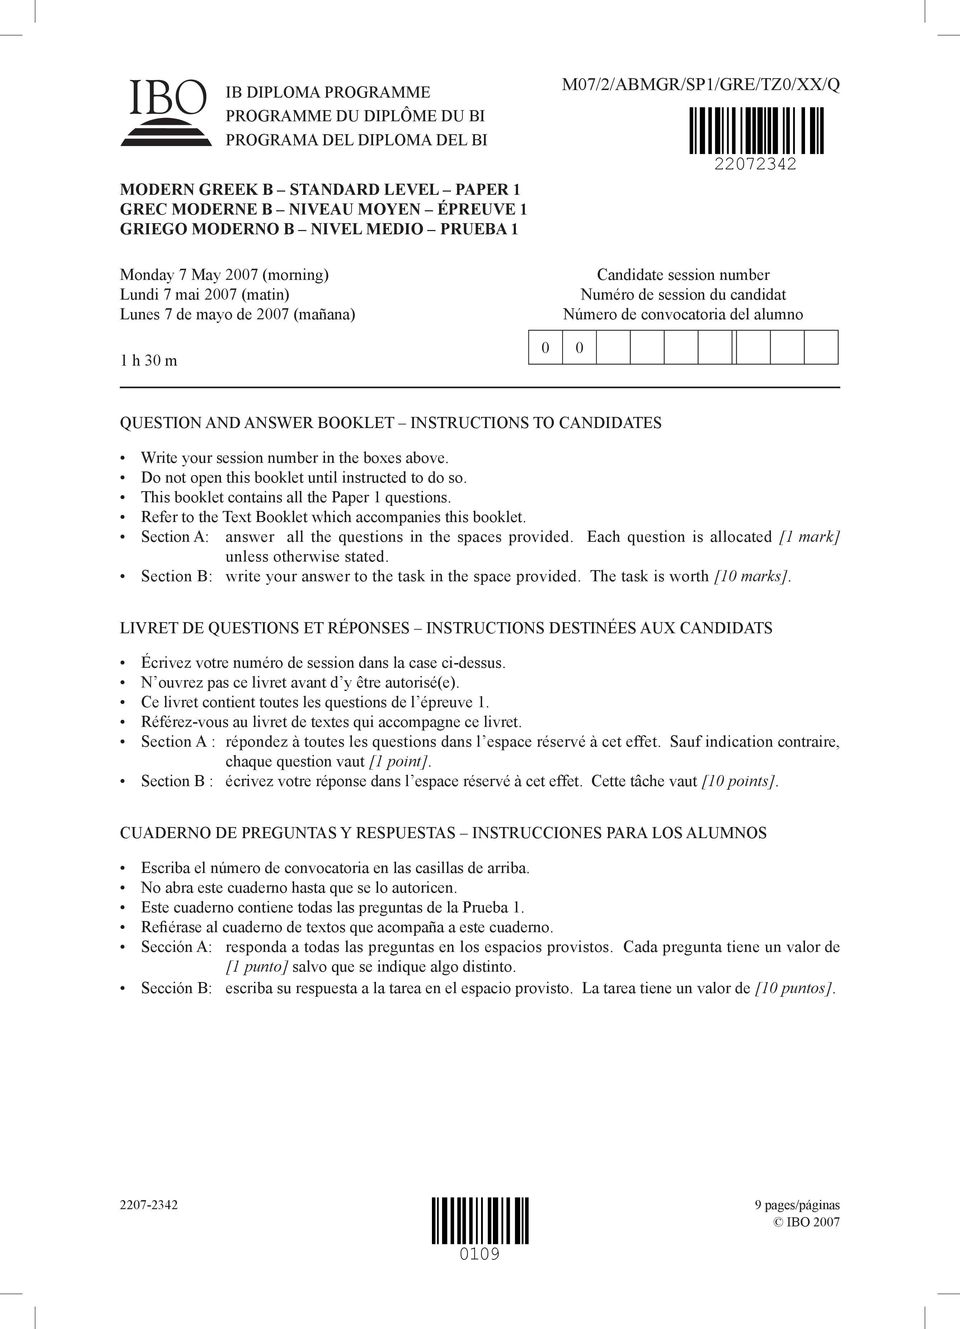 convocatoria del alumno QUESTION AND ANSWER BOOKLET INSTRUCTIONS TO CANDIDATES Write your session number in the boxes above. Do not open this booklet until instructed to do so.